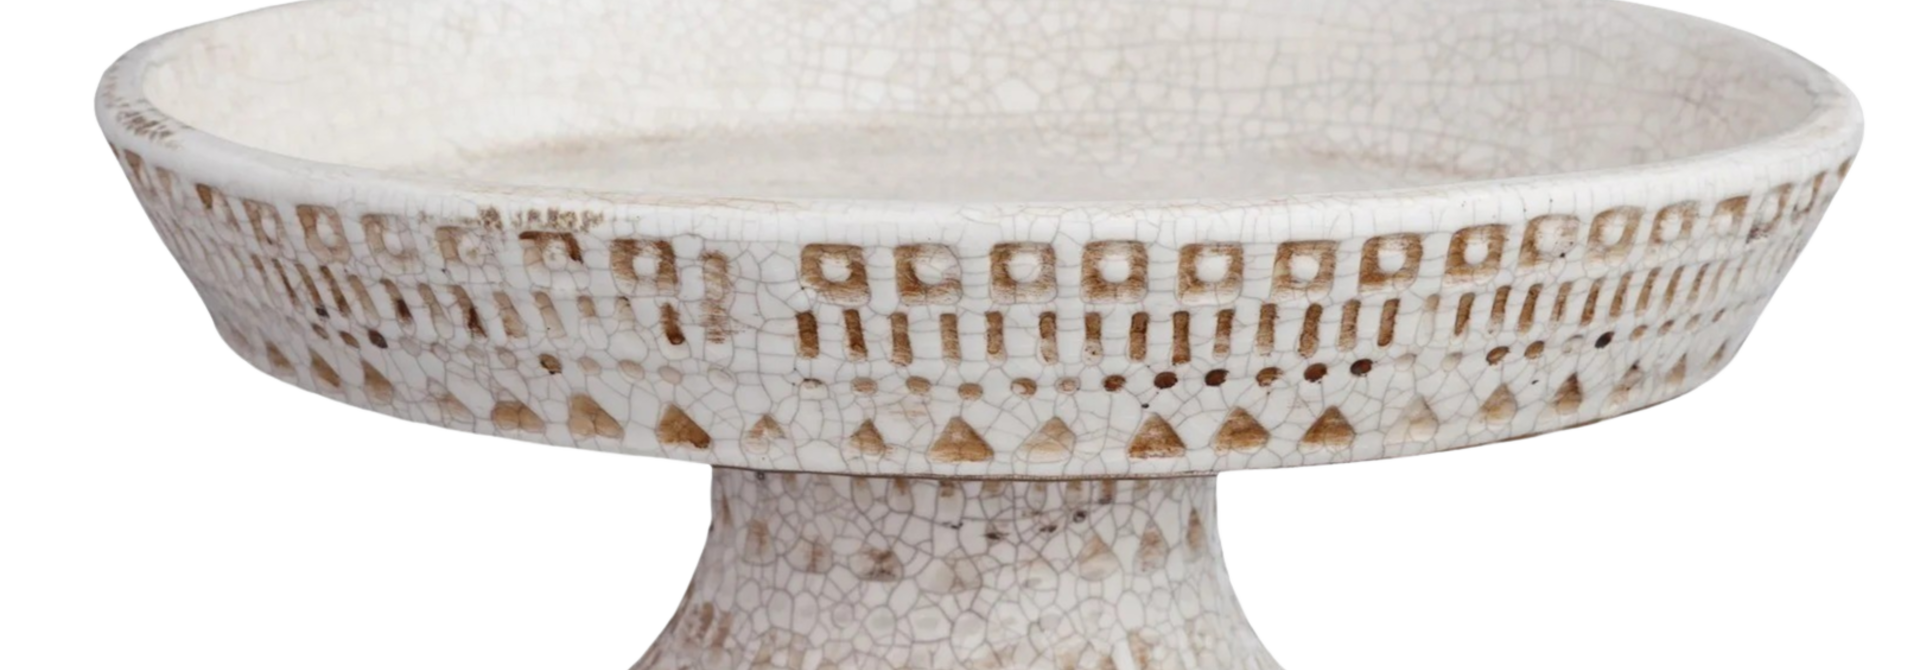 Pedestal Bowl | The Accessory Collection, White - 13.75 Inch x 13.75 Inch x 6 Inch